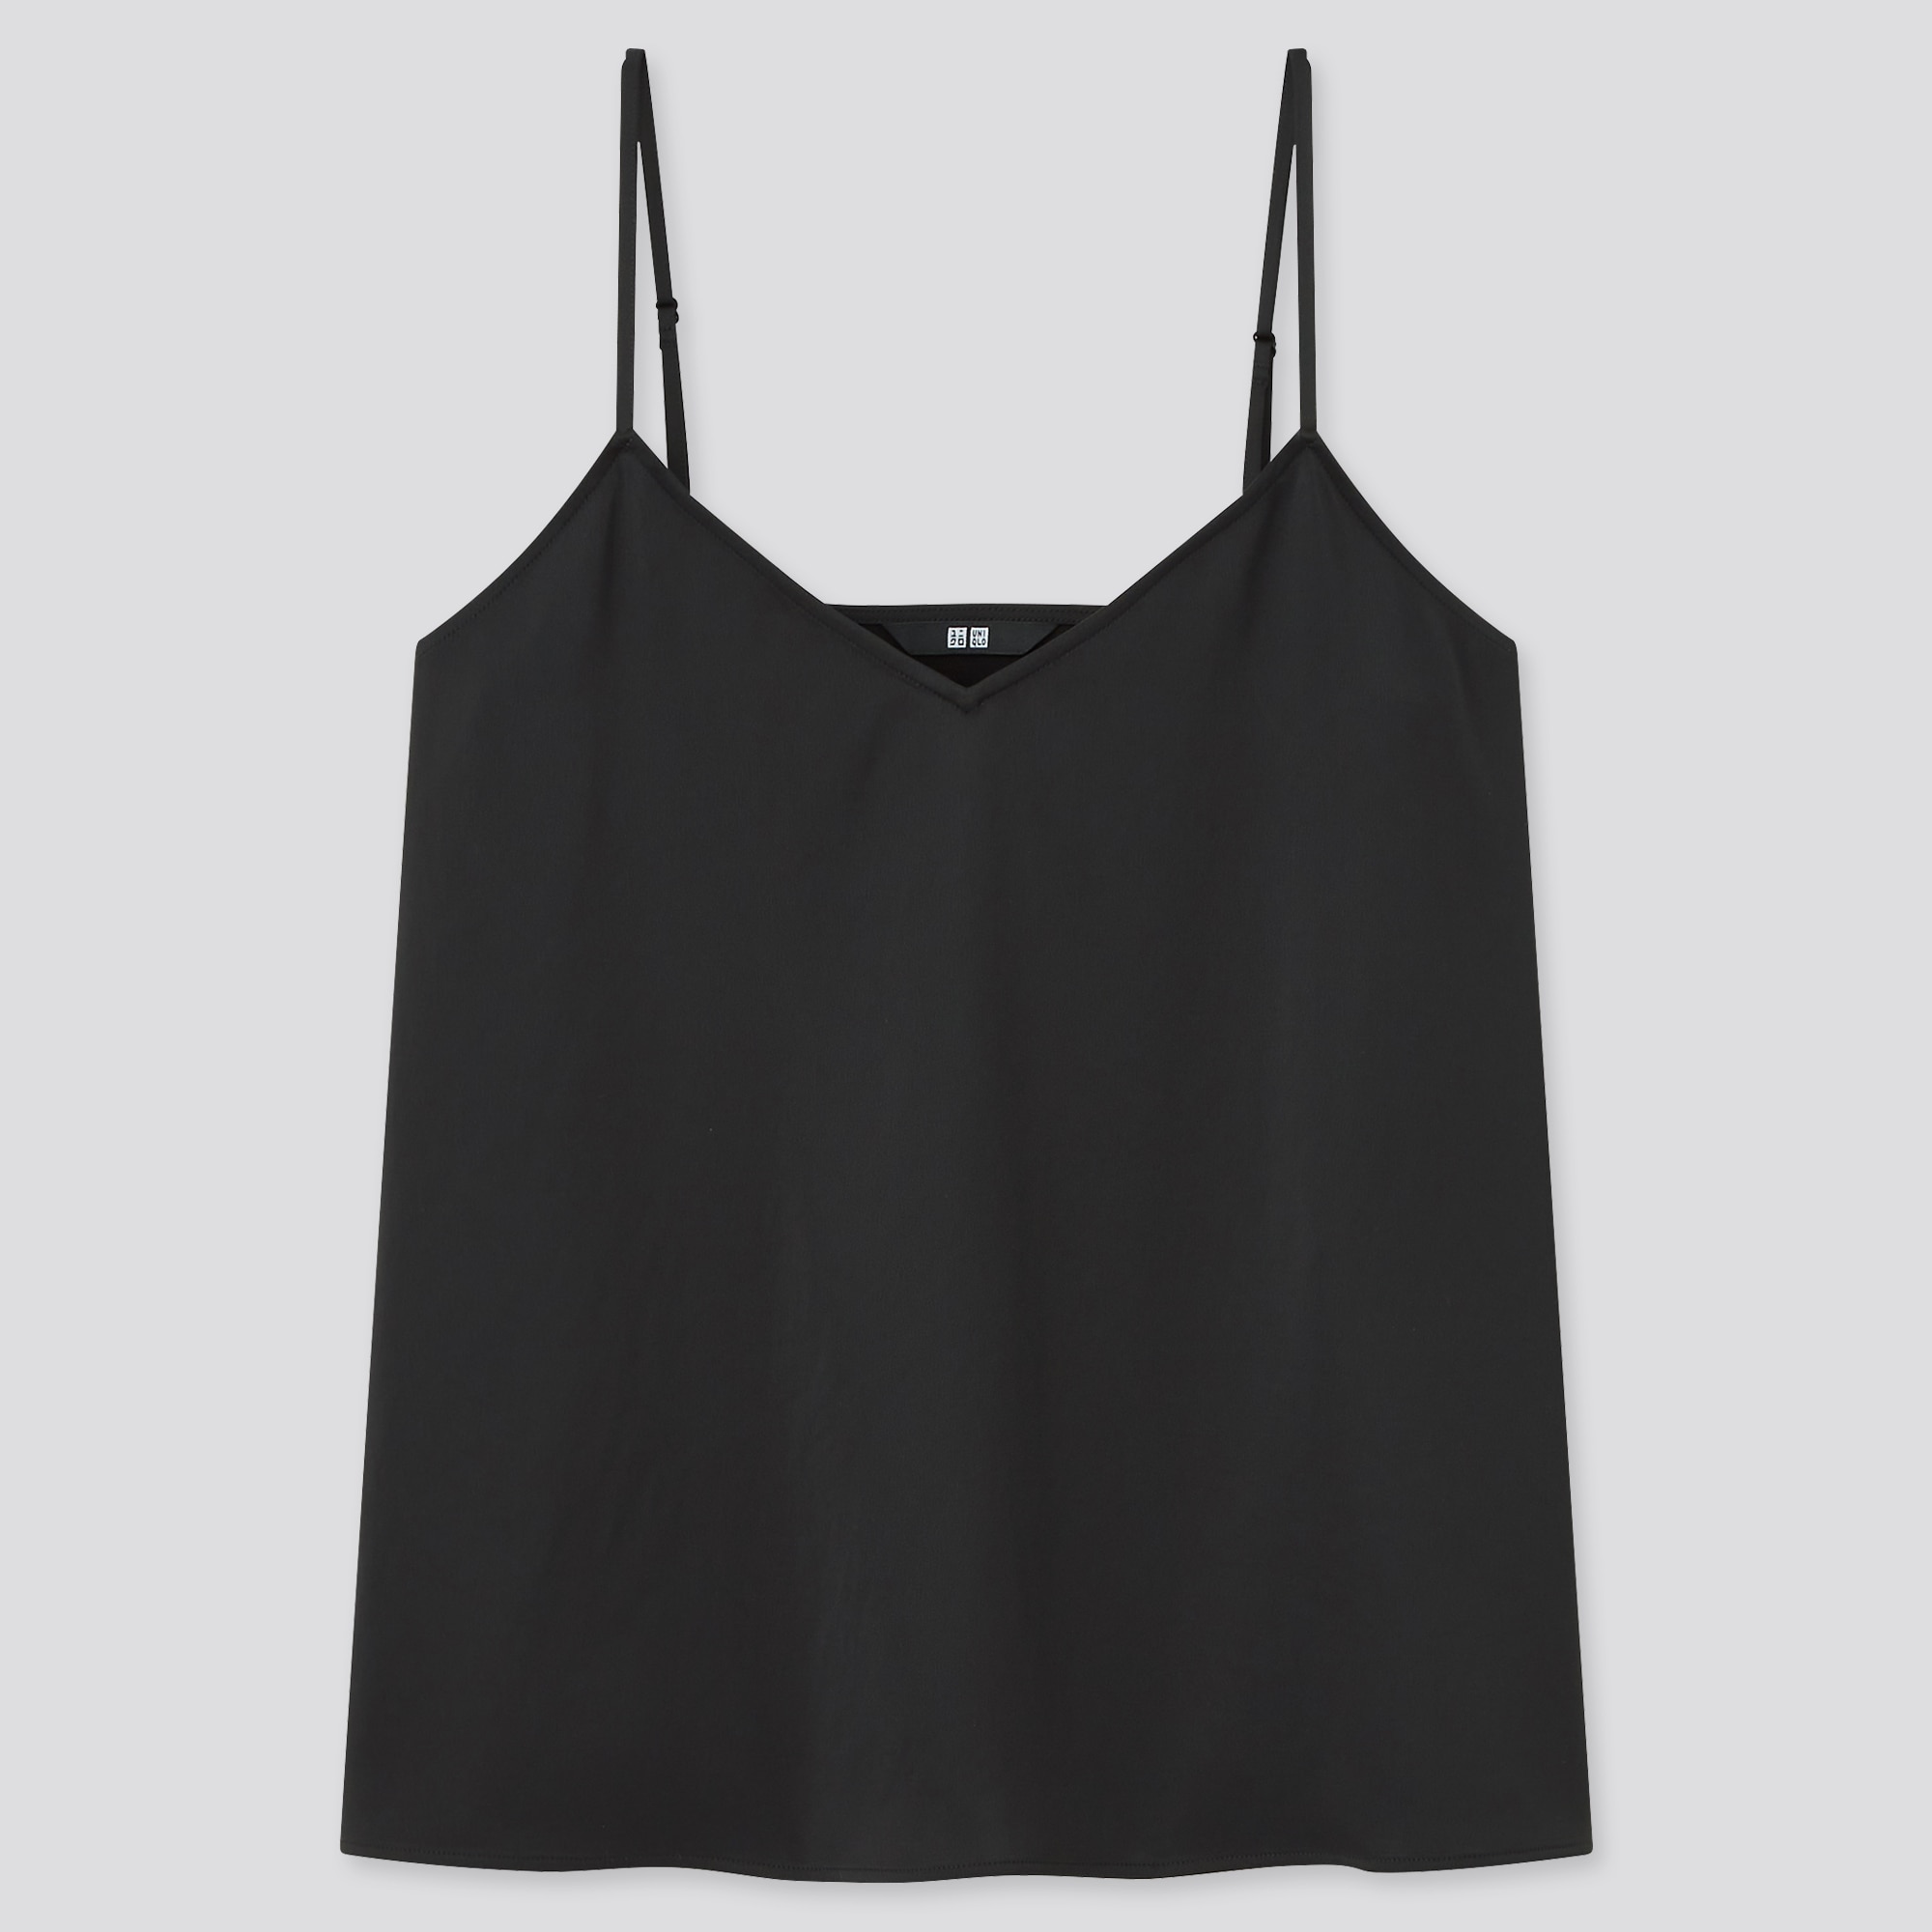 Uniqlo Padded Camisoles for Women